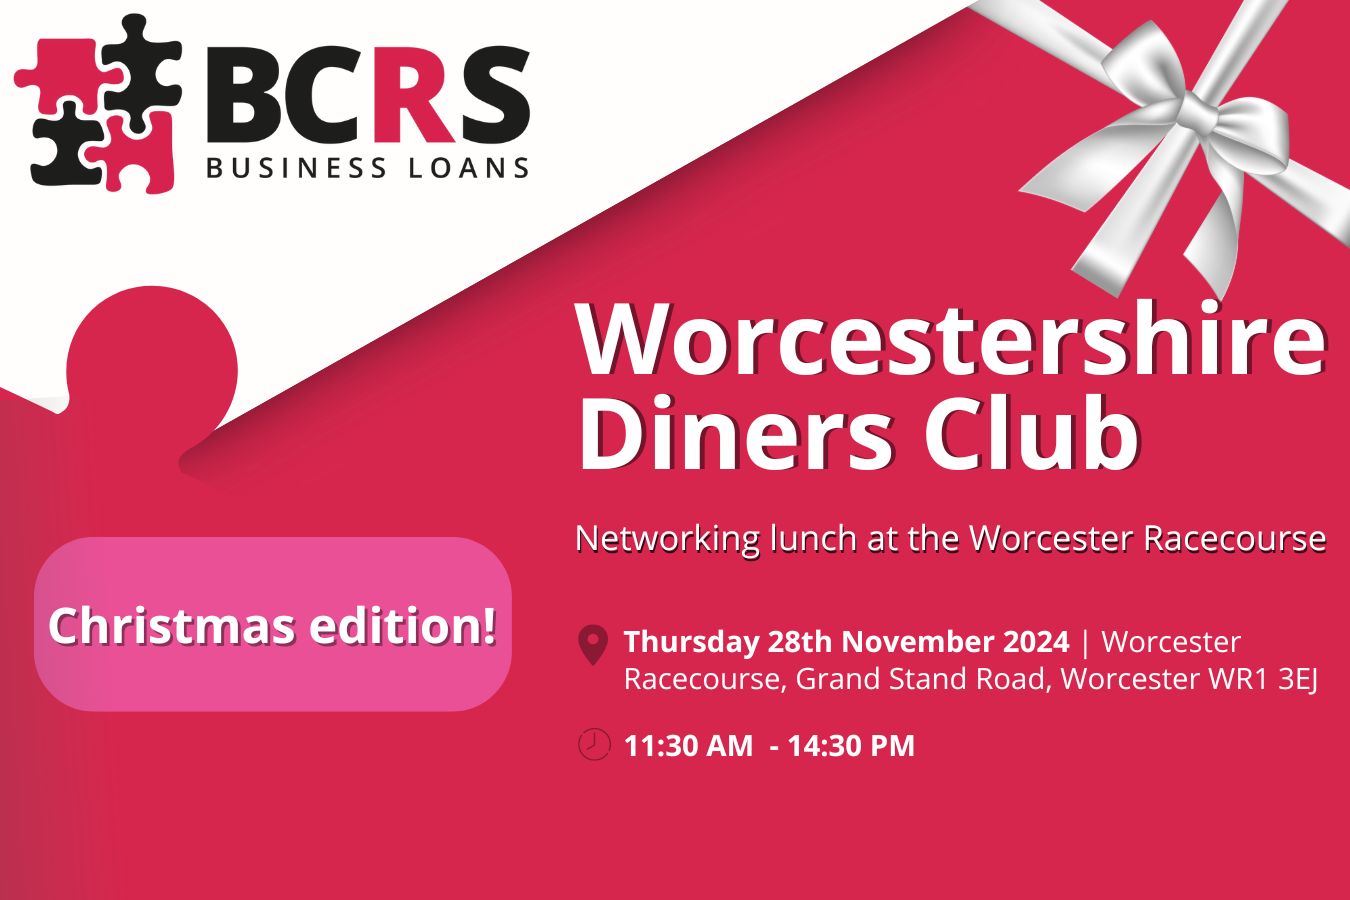 Worcestershire Diners Club Christmas Special